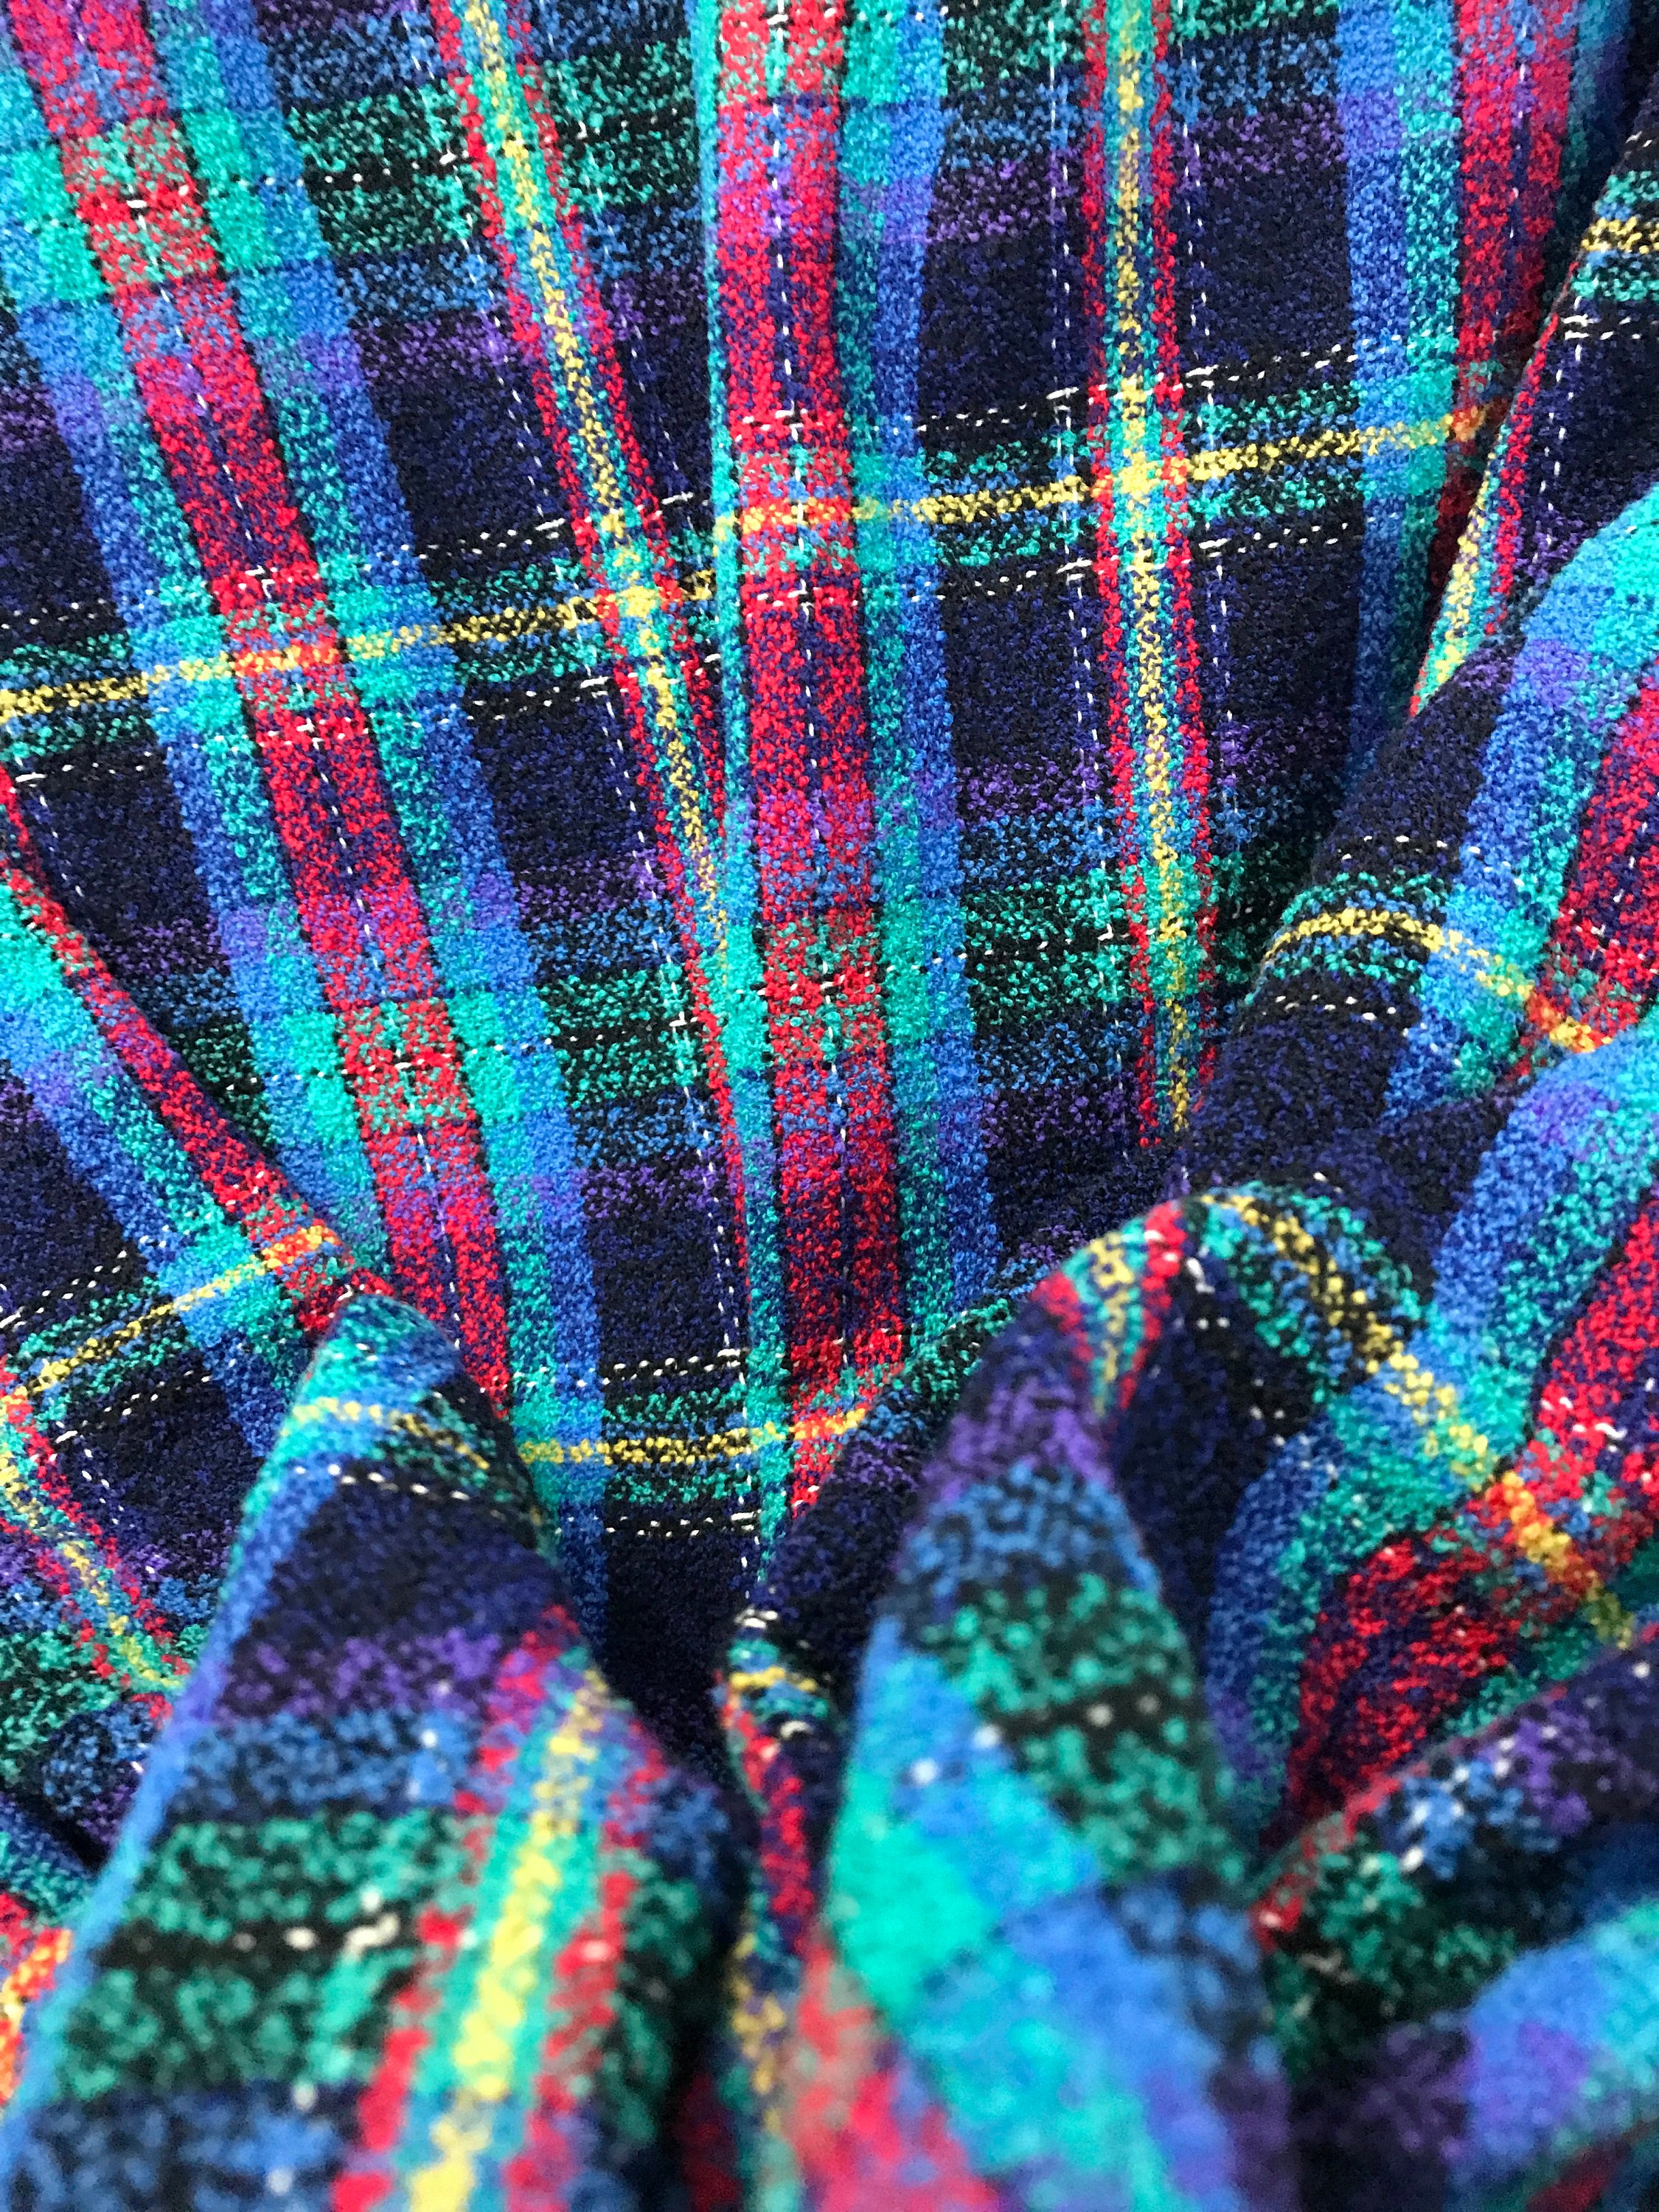 tweed boucle check fabric Red blue pure wool check fabric kilt plaid skirt bustle sewing dressmaking shawl stole scarf 150cm 60"